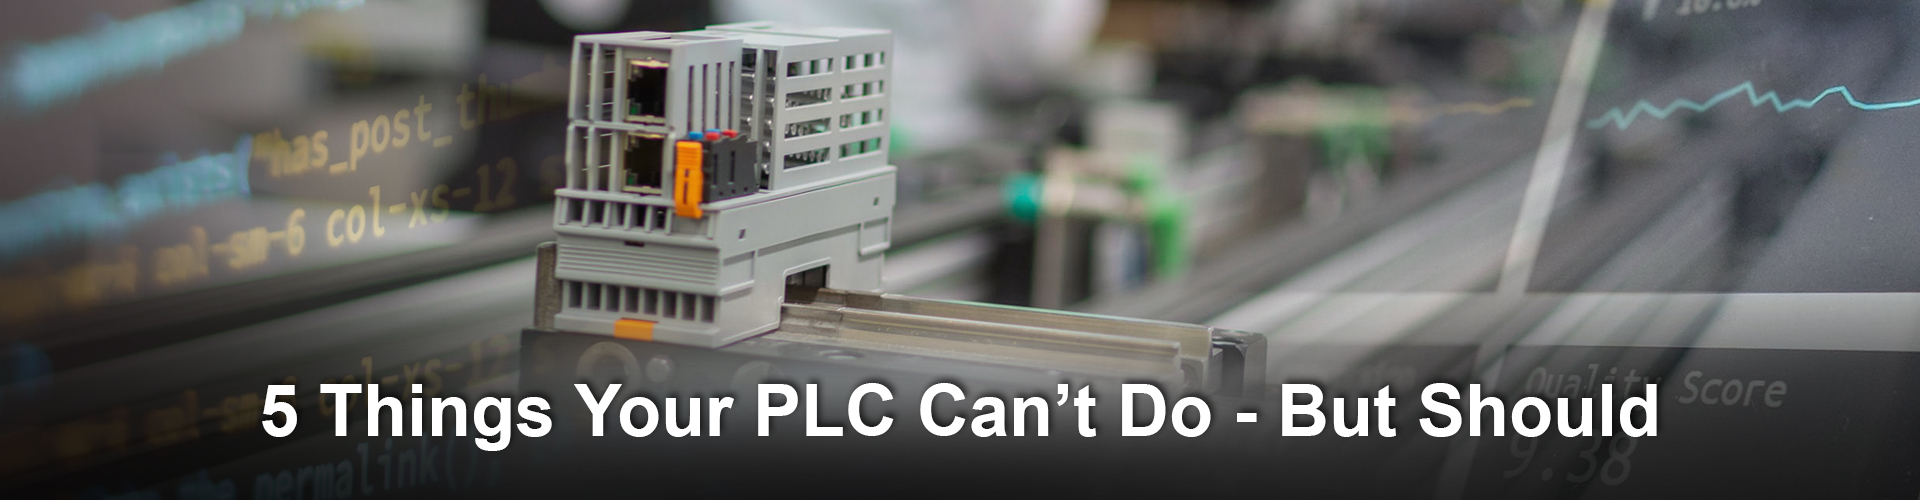 5 THings your PLC can't do but should